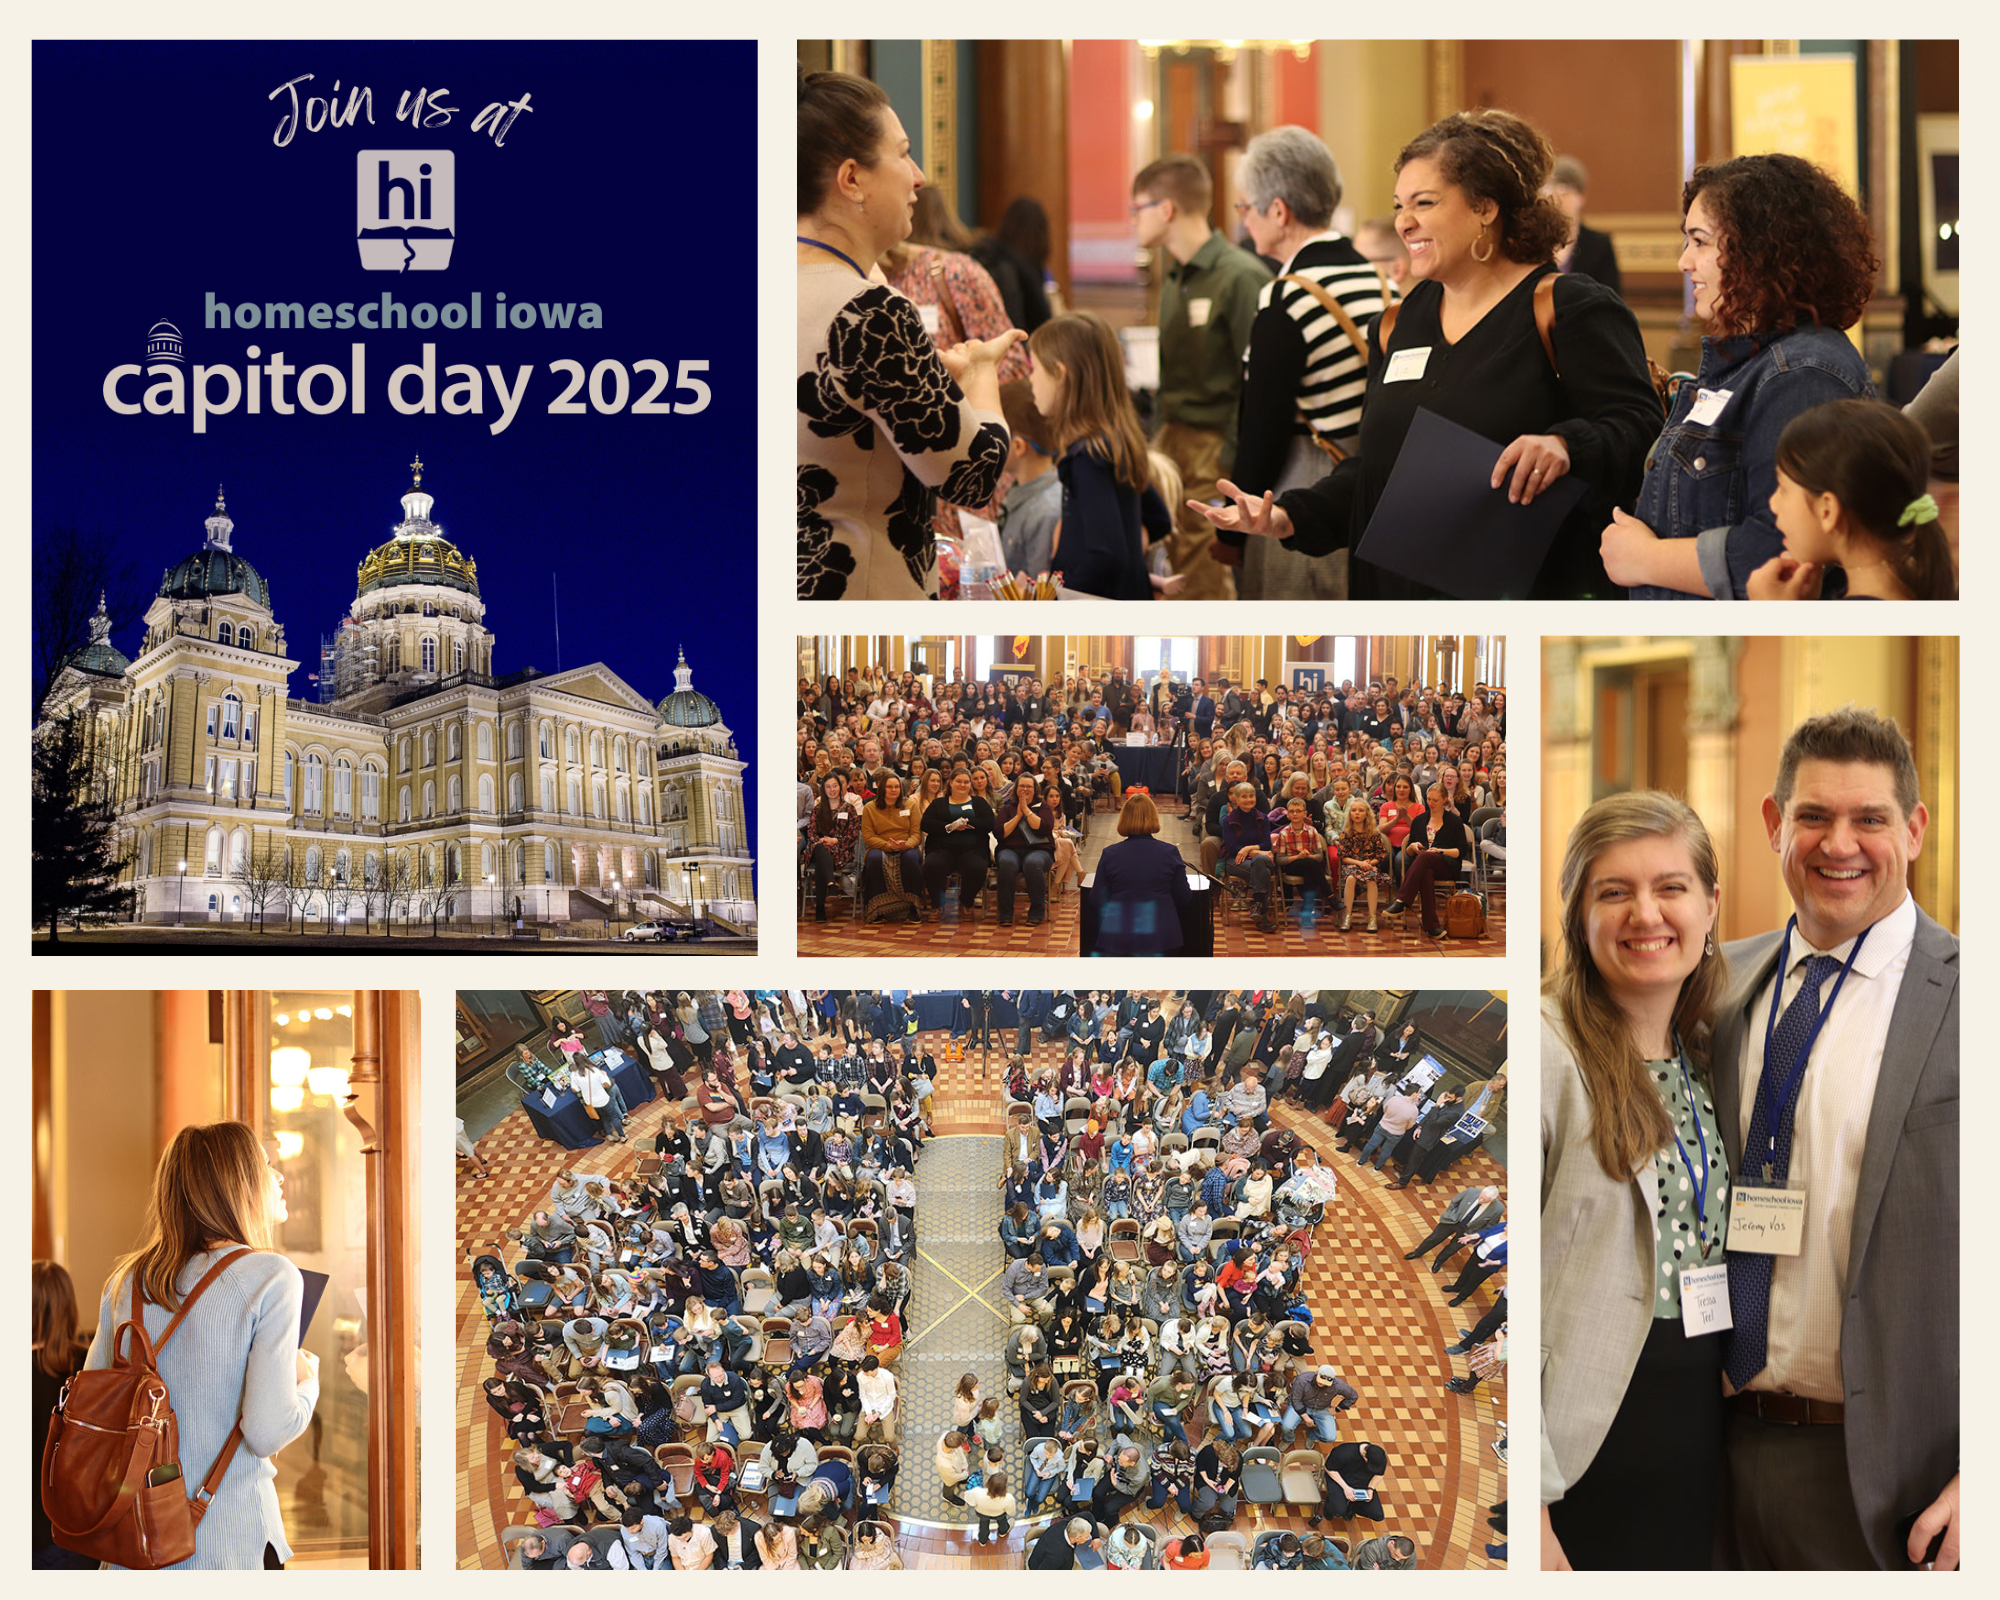 Join us at Homeschool Iowa Capitol Day 2025